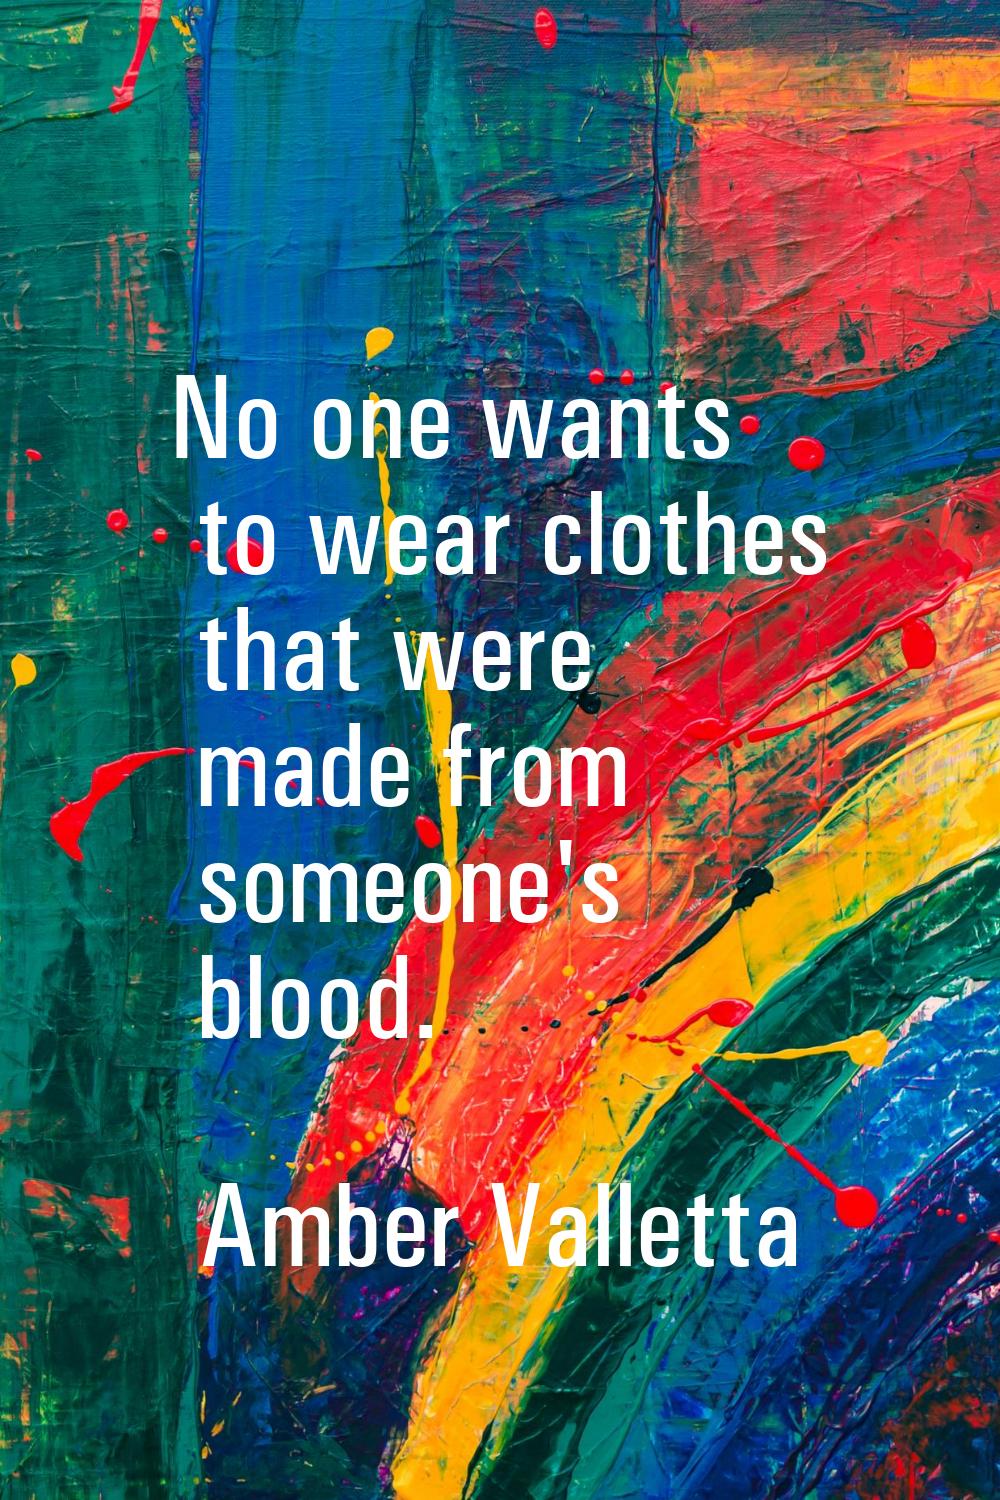 No one wants to wear clothes that were made from someone's blood.